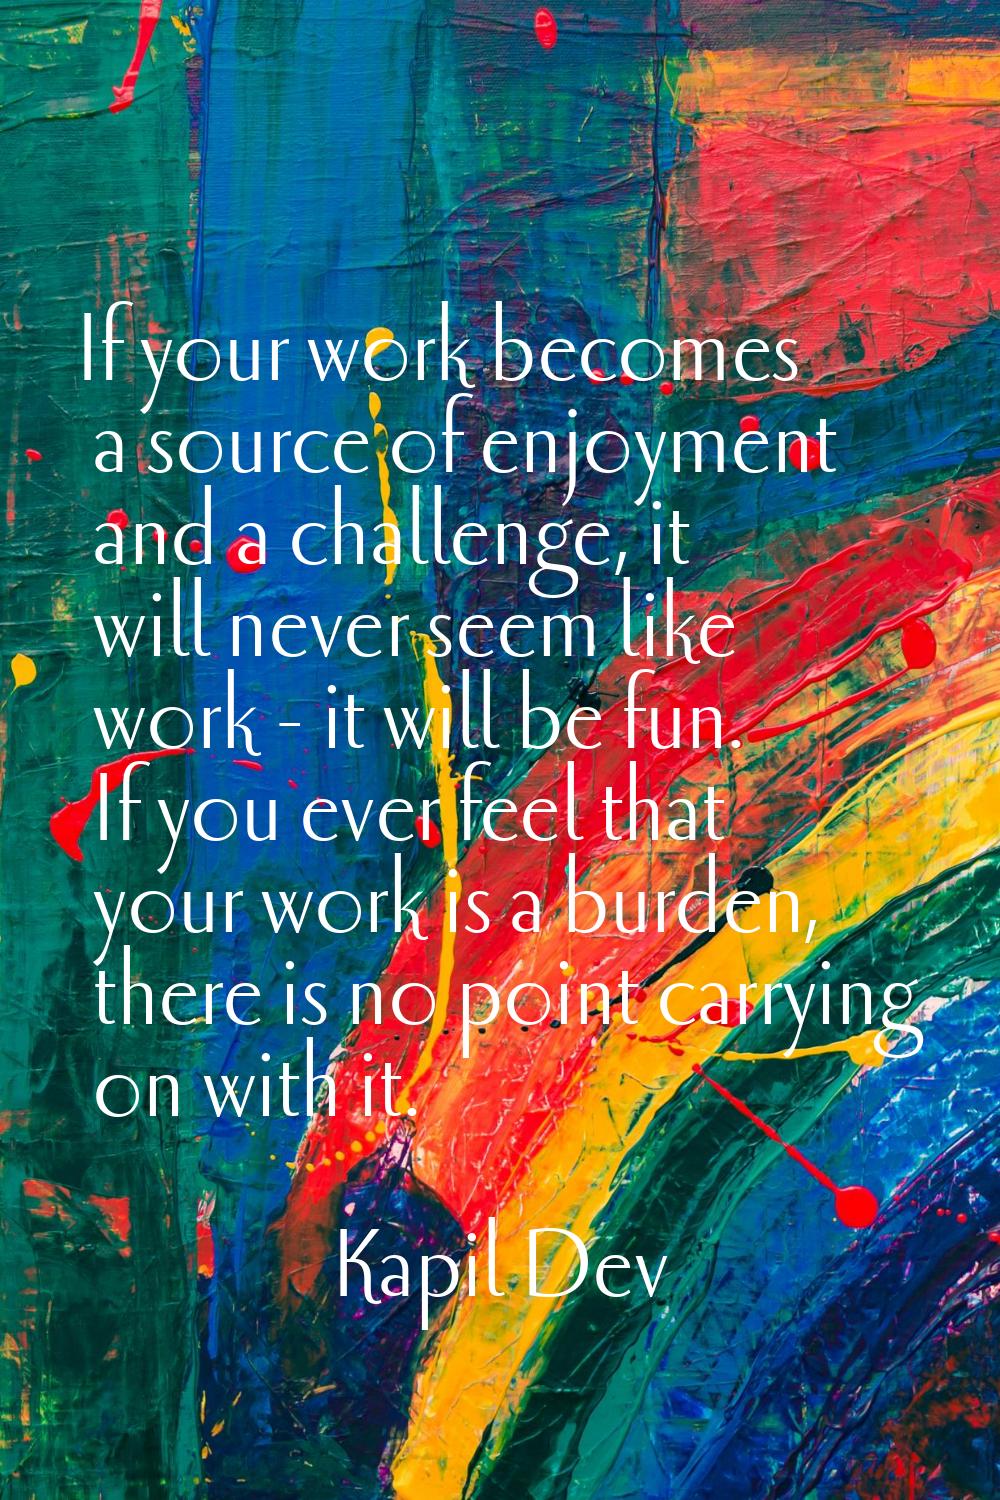 If your work becomes a source of enjoyment and a challenge, it will never seem like work - it will 